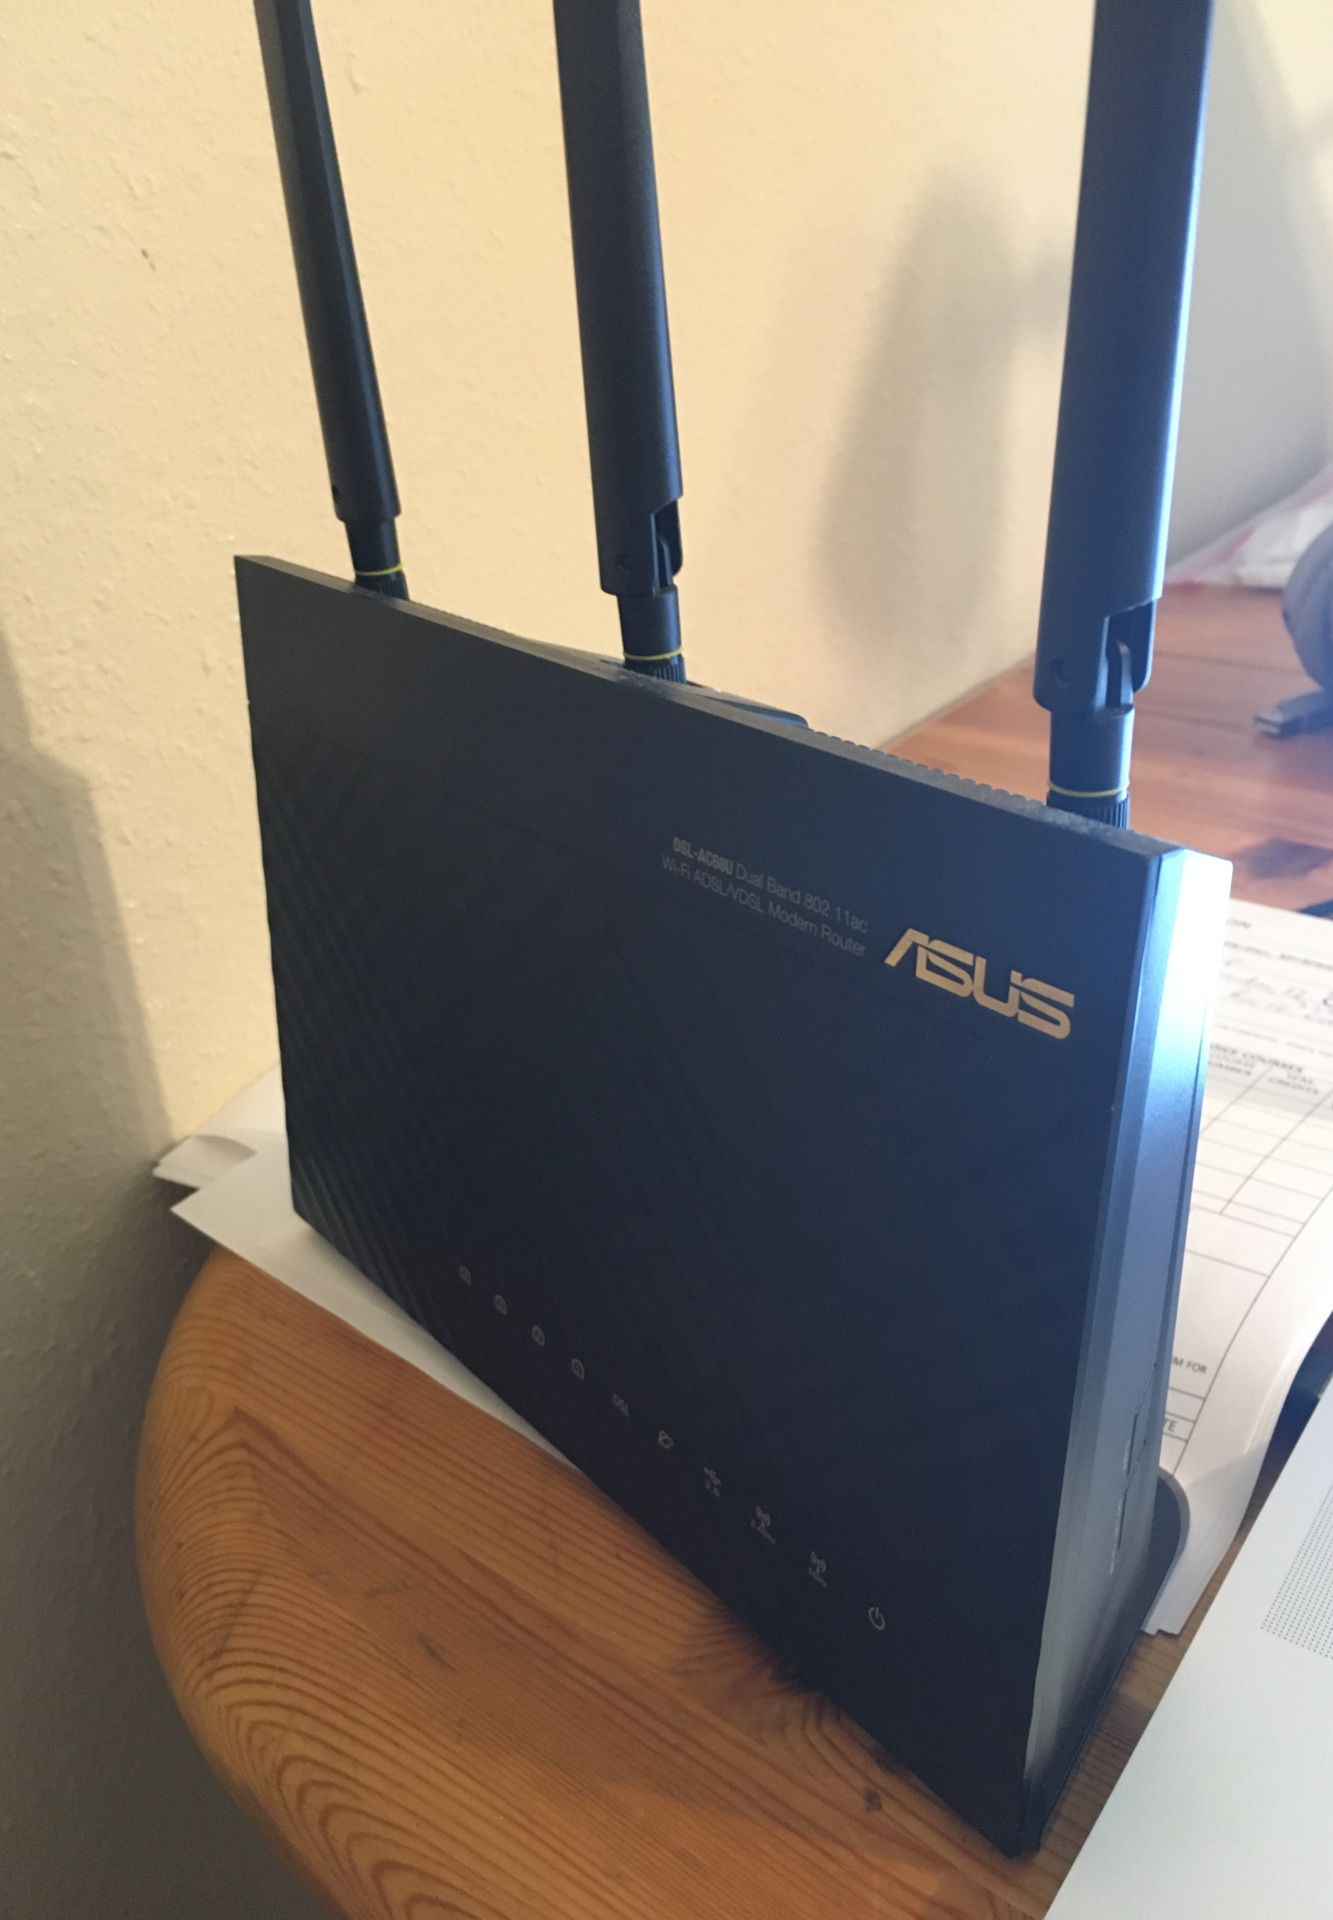 Asus DSL-AC68U dual band router 802.11ac WiFi router in great condition and power cable internet firewall Adsl/Vdsl